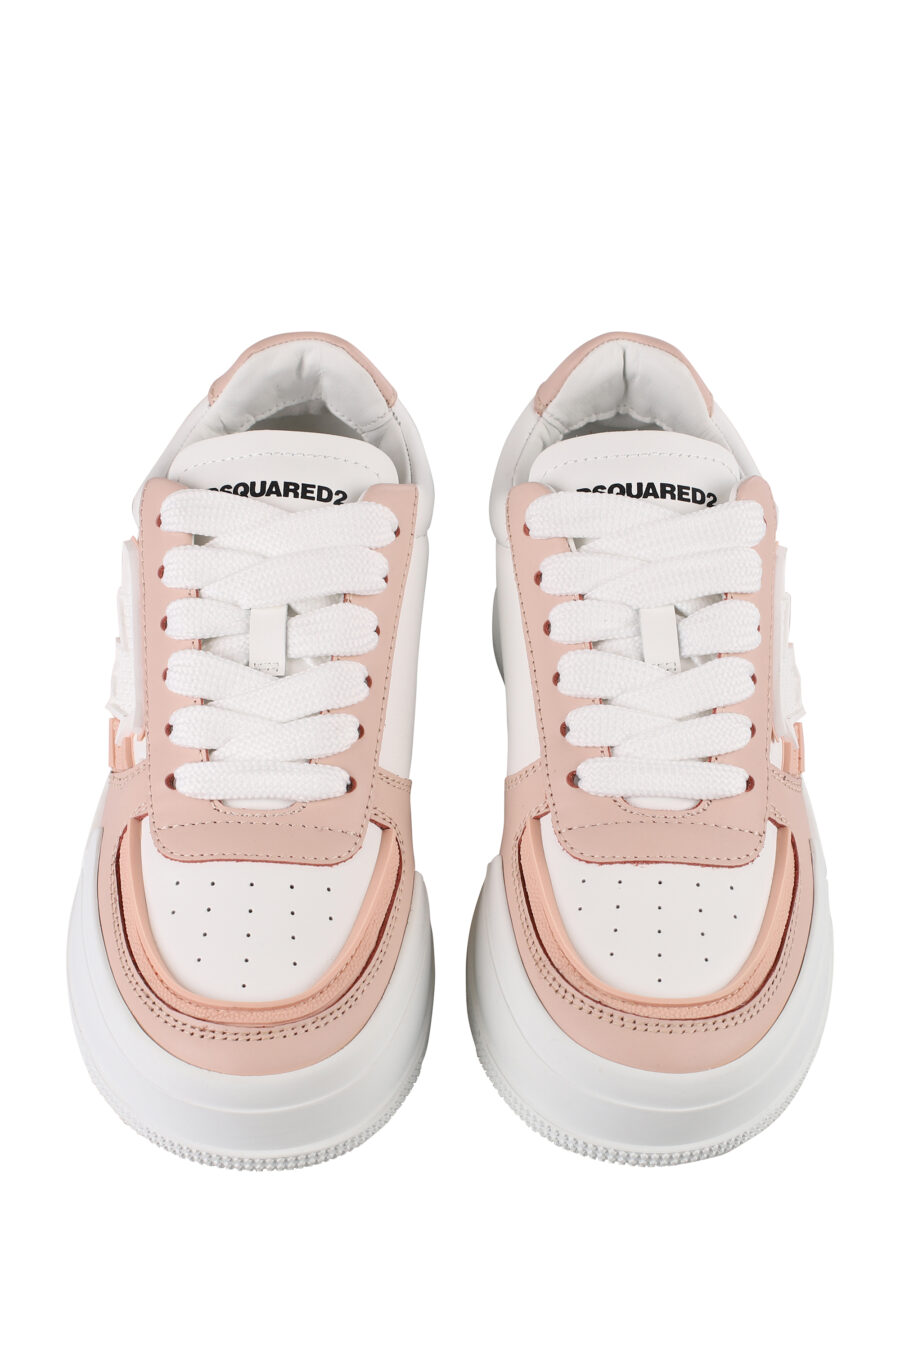 White platform trainers with pink detail - IMG 1225